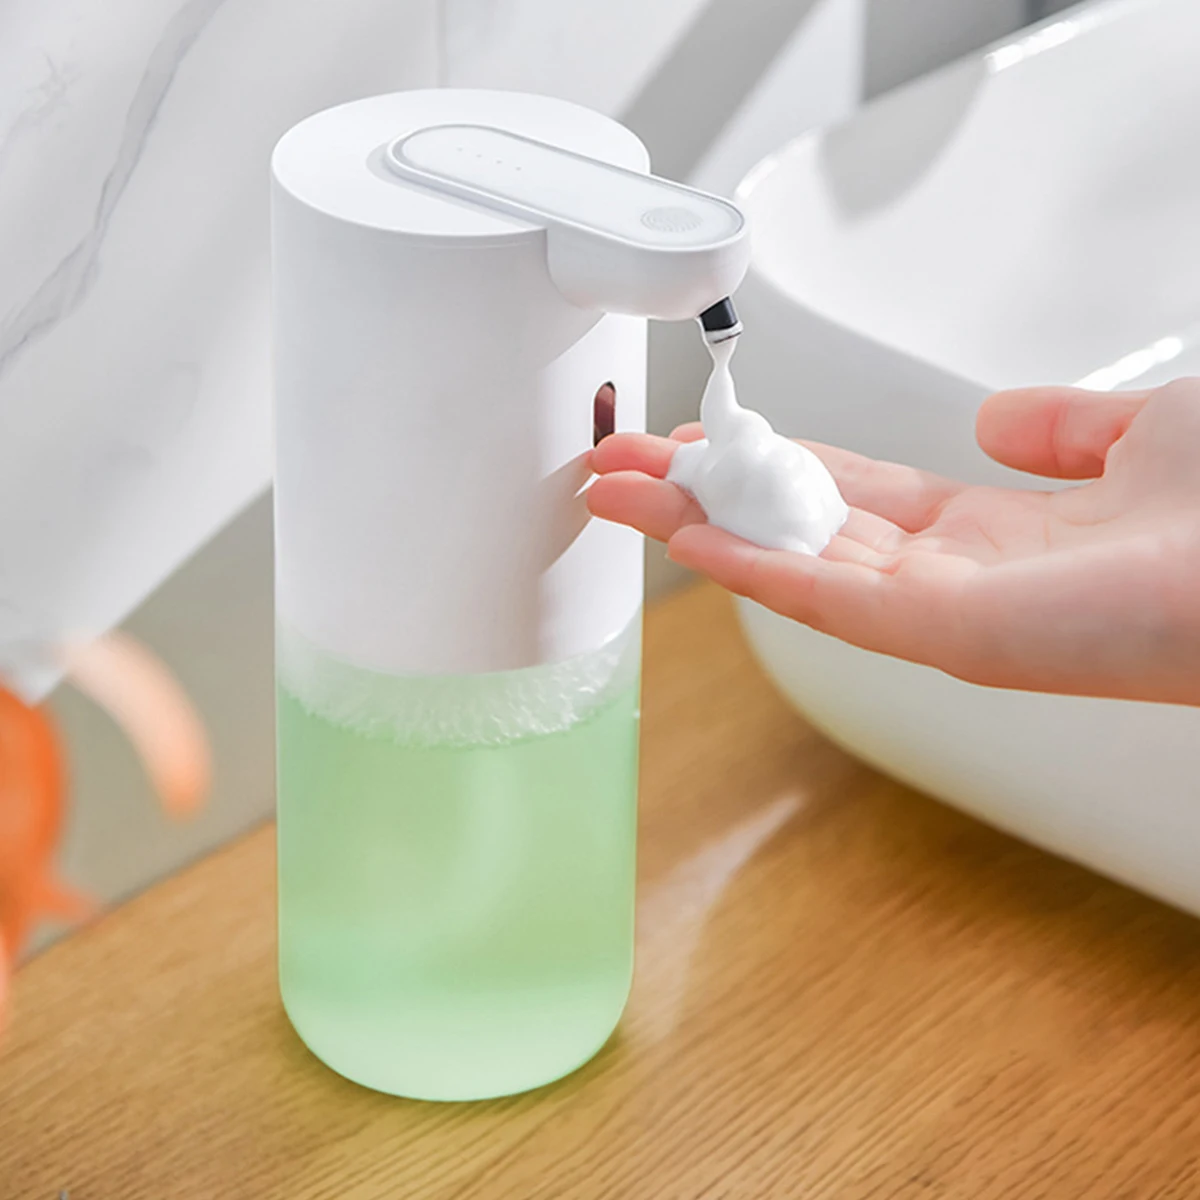 

Automatic Foaming Soap Dispenser 400ml/13.5oz Rechargeable Hand Sanitizer Dispenser with 4 Adjustable Gears Wall Mount Touchless